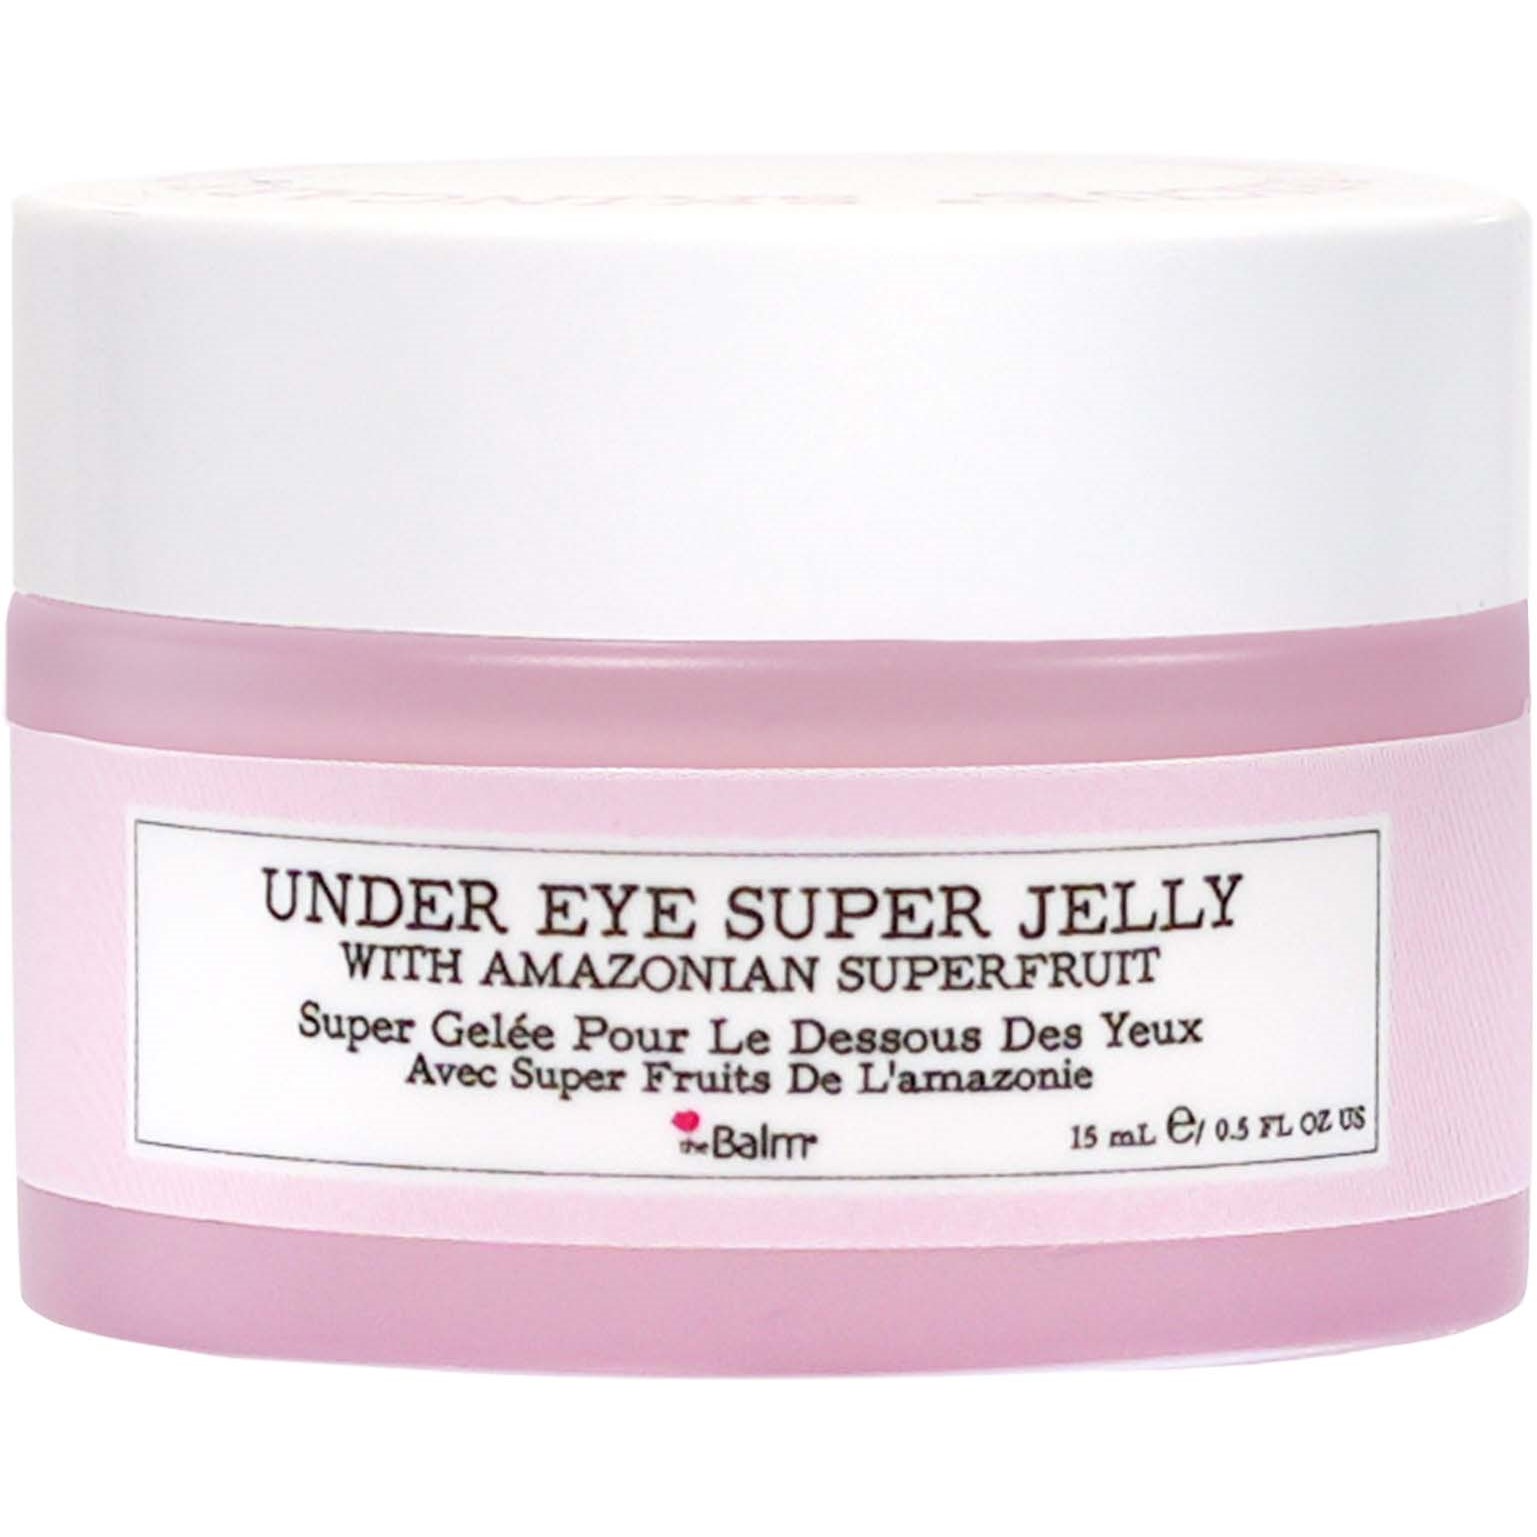 theBalm Cosmetics the Balm theBalm to the Rescue Under Eye Super Jelly 15 ml